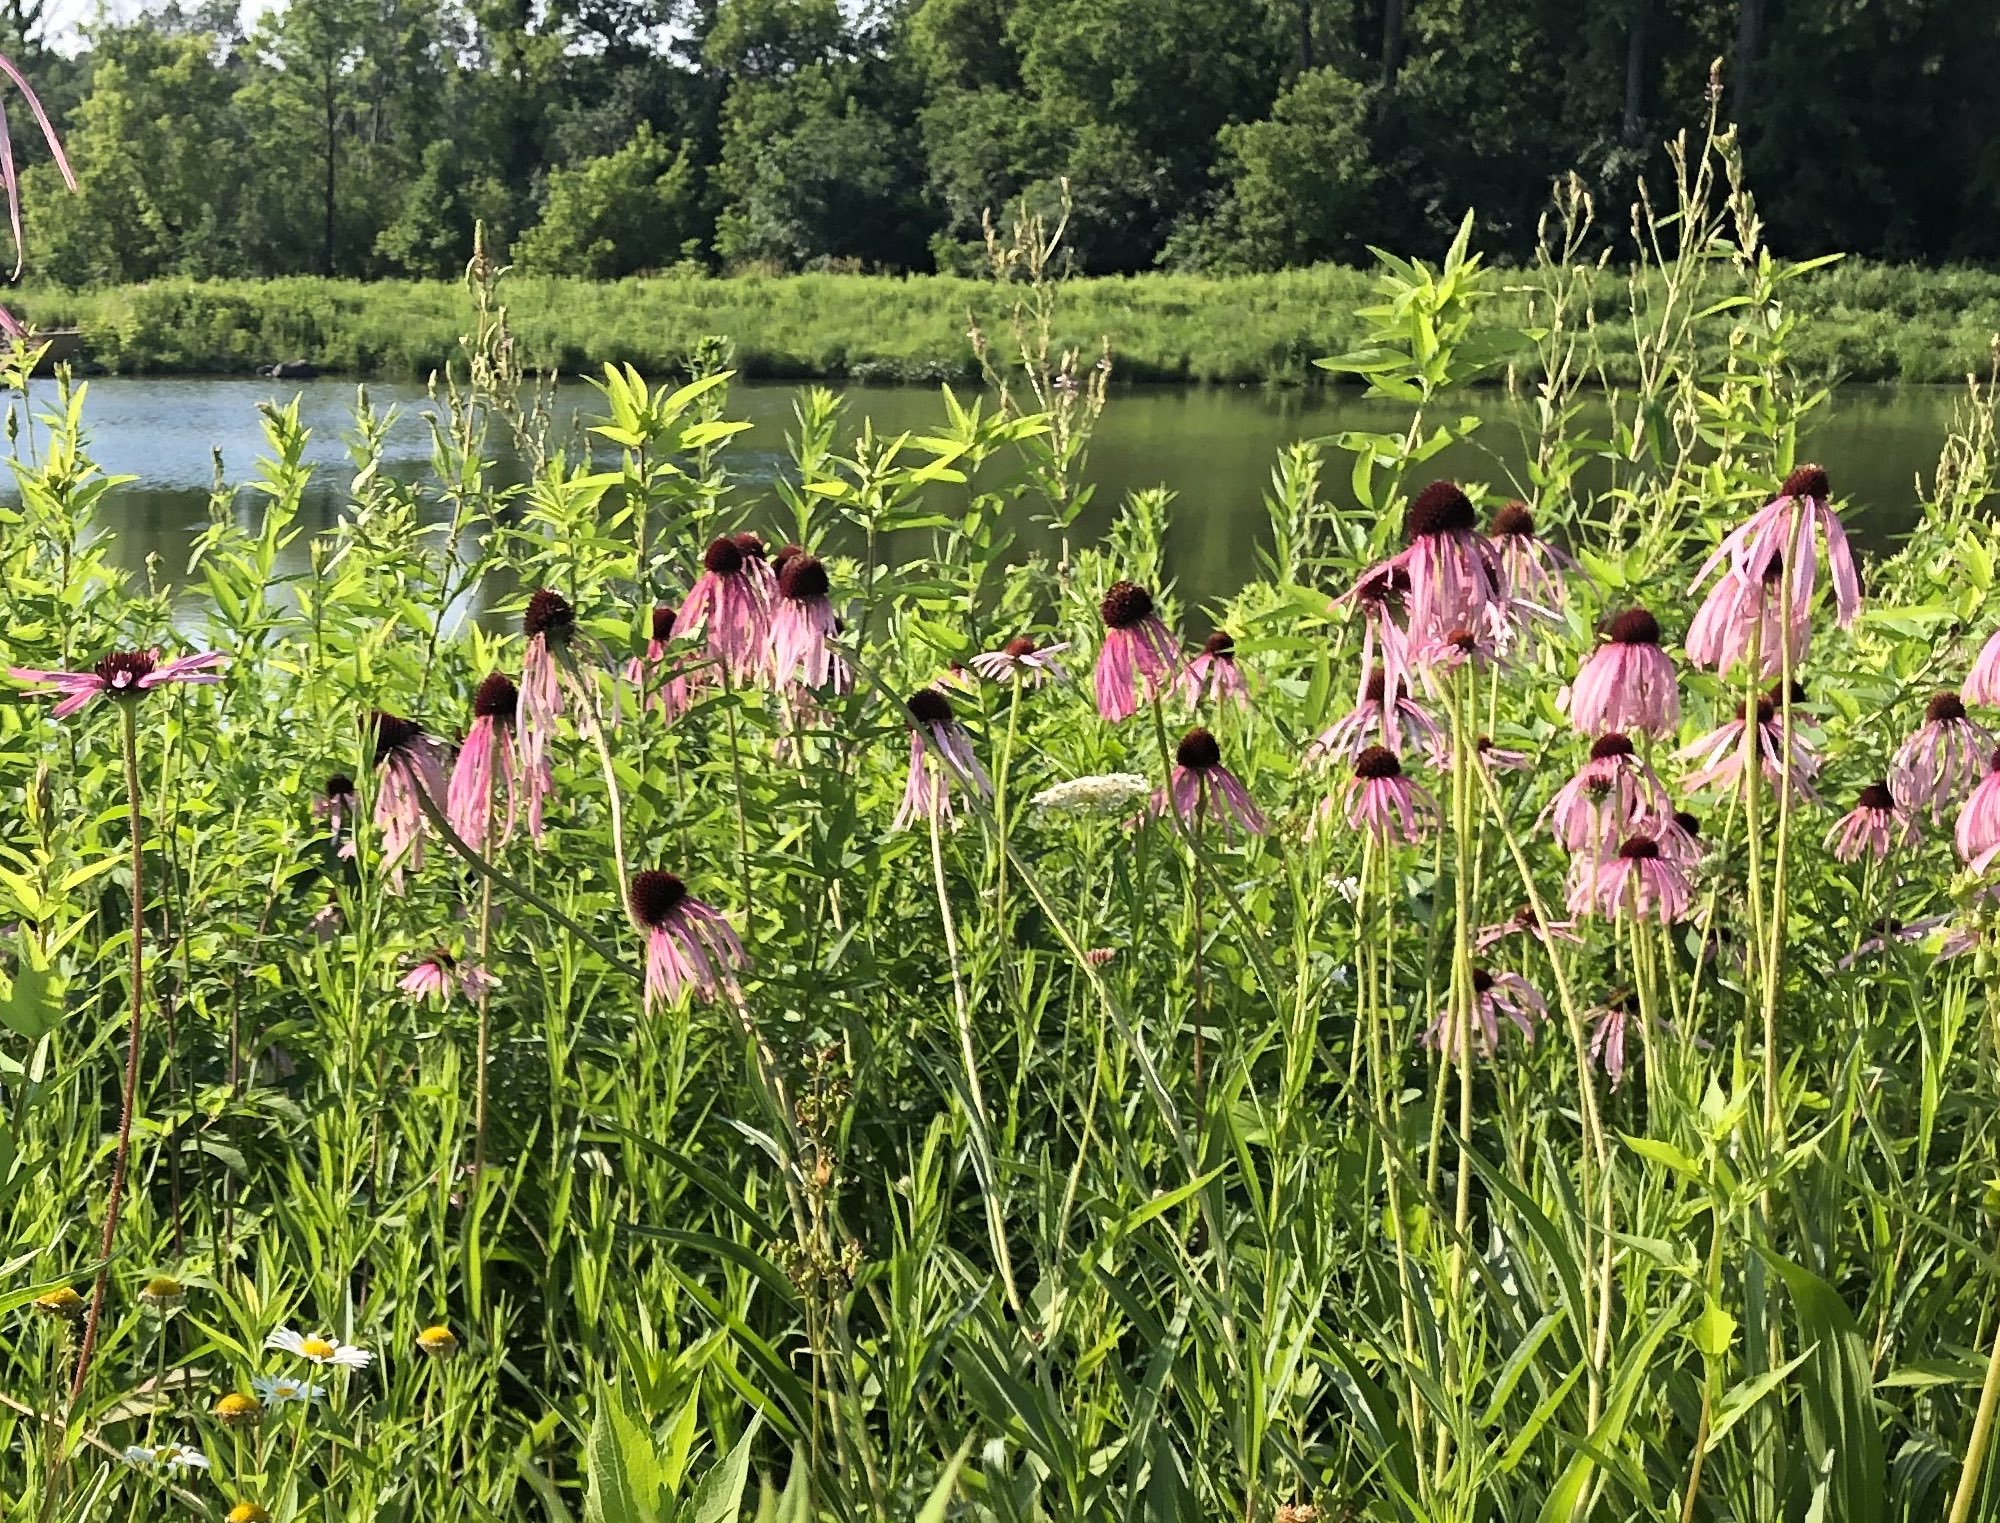 Pale purple coneflower on bank of Retaining Pond on corner of Nakoma Road and Manitou Way on July 8, 2019.